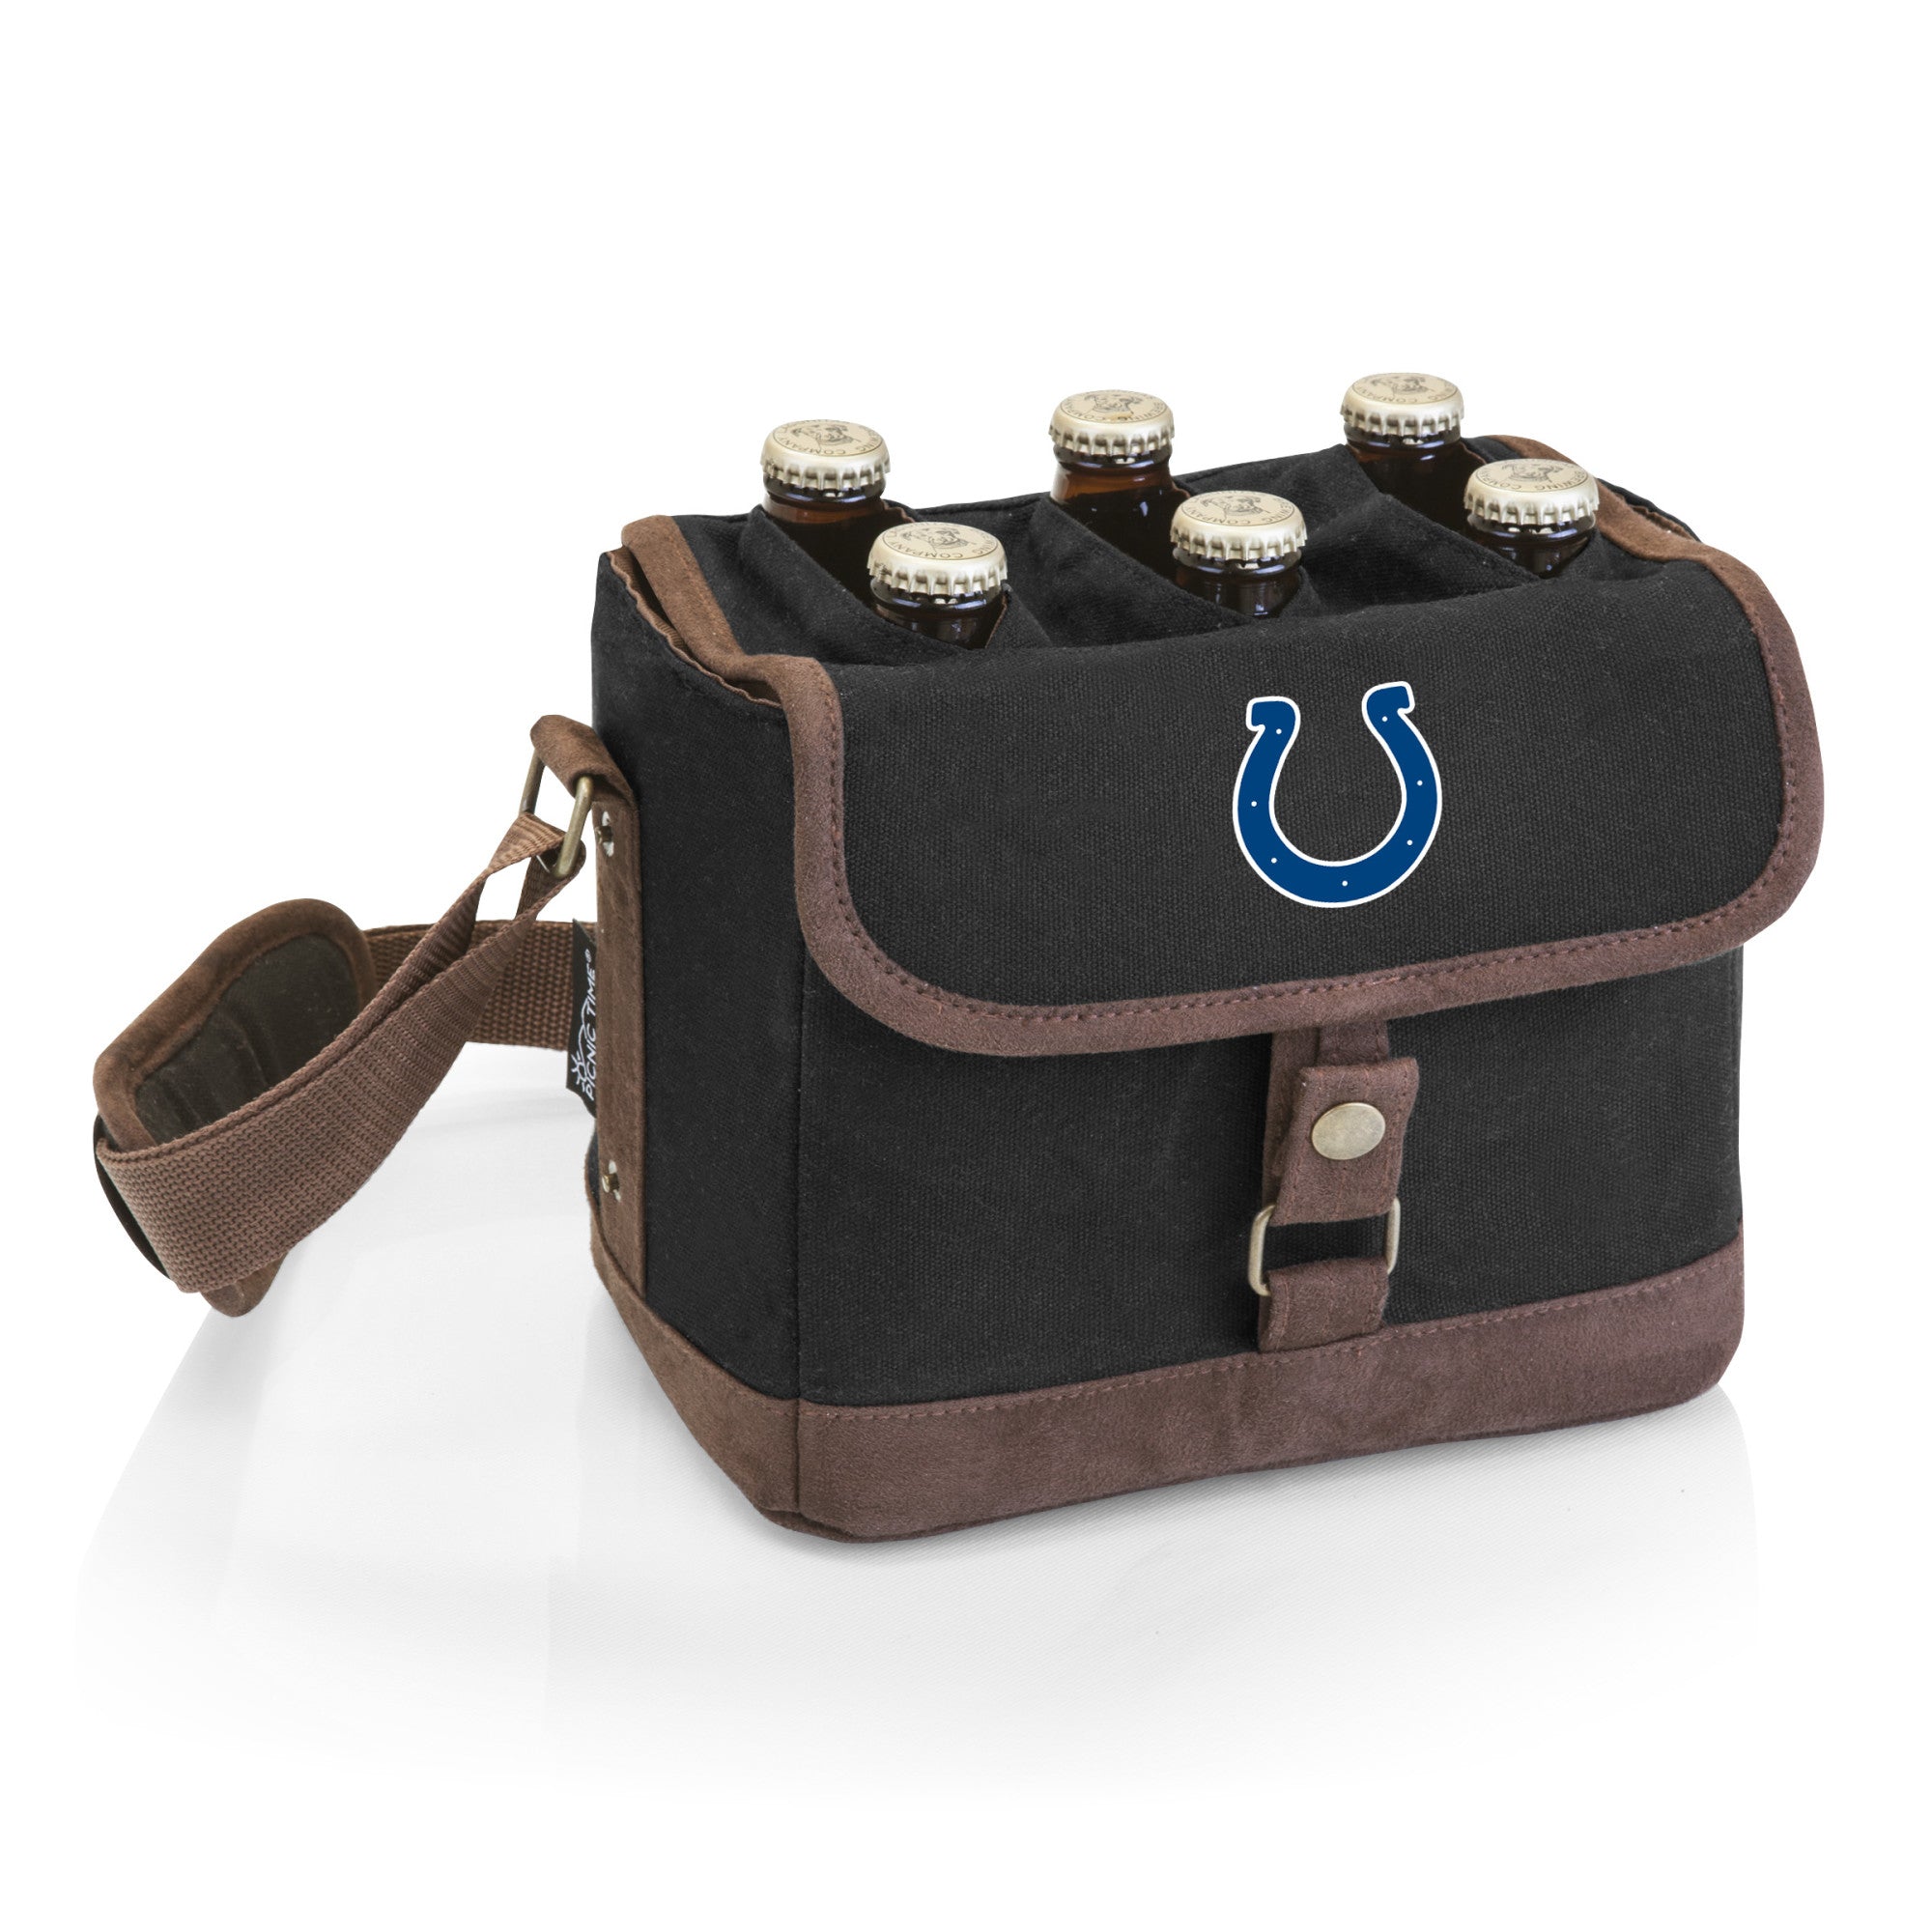 Indianapolis Colts - Beer Caddy Cooler Tote with Opener